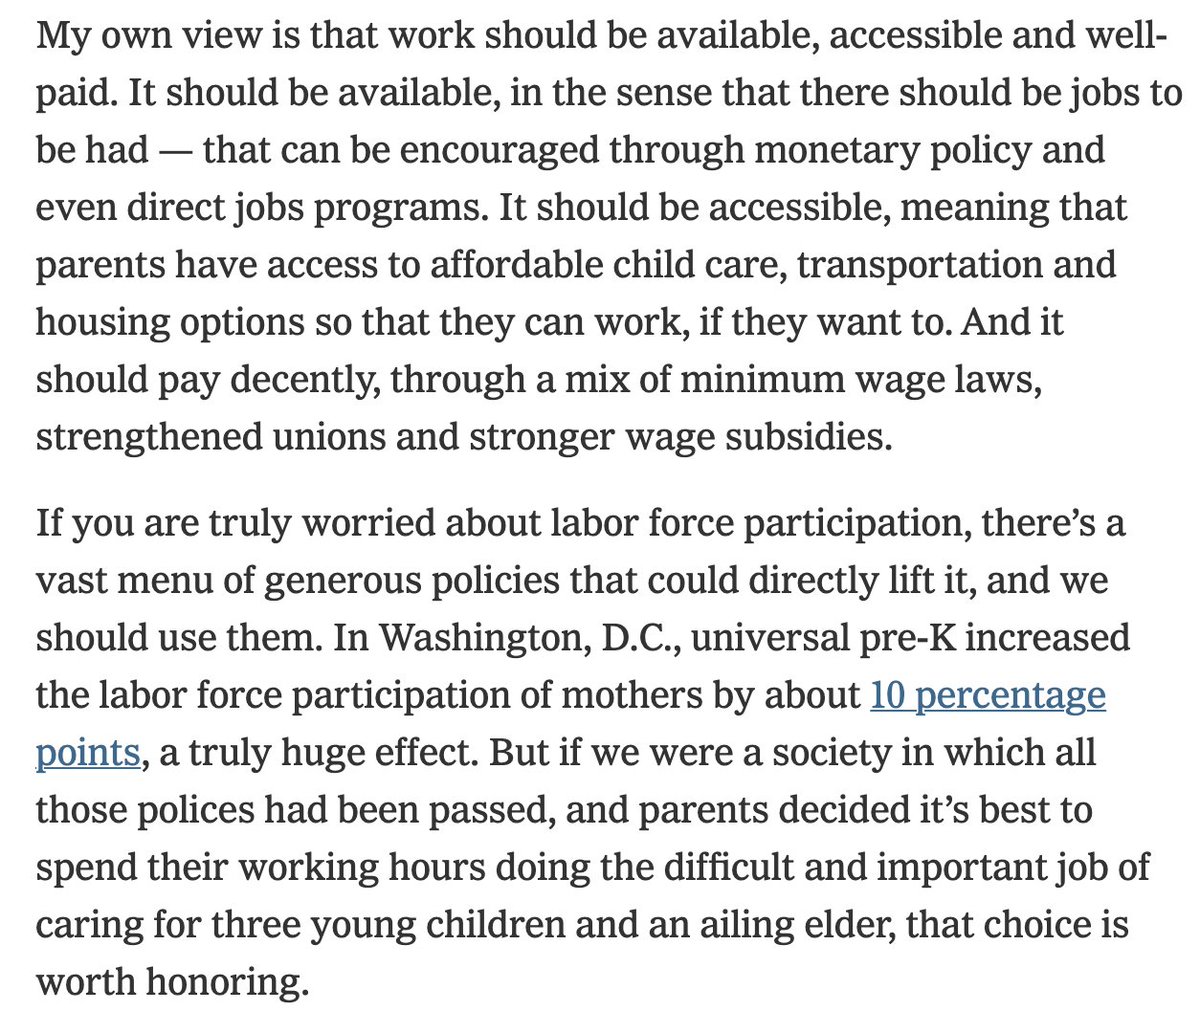 One frustration I have in this debate is that a lot of the Republicans who are very eager to use poverty as a way to push people into low-wage work are not eager to make work better or more accessible for parents. I don't think that's a truly pro-work position.